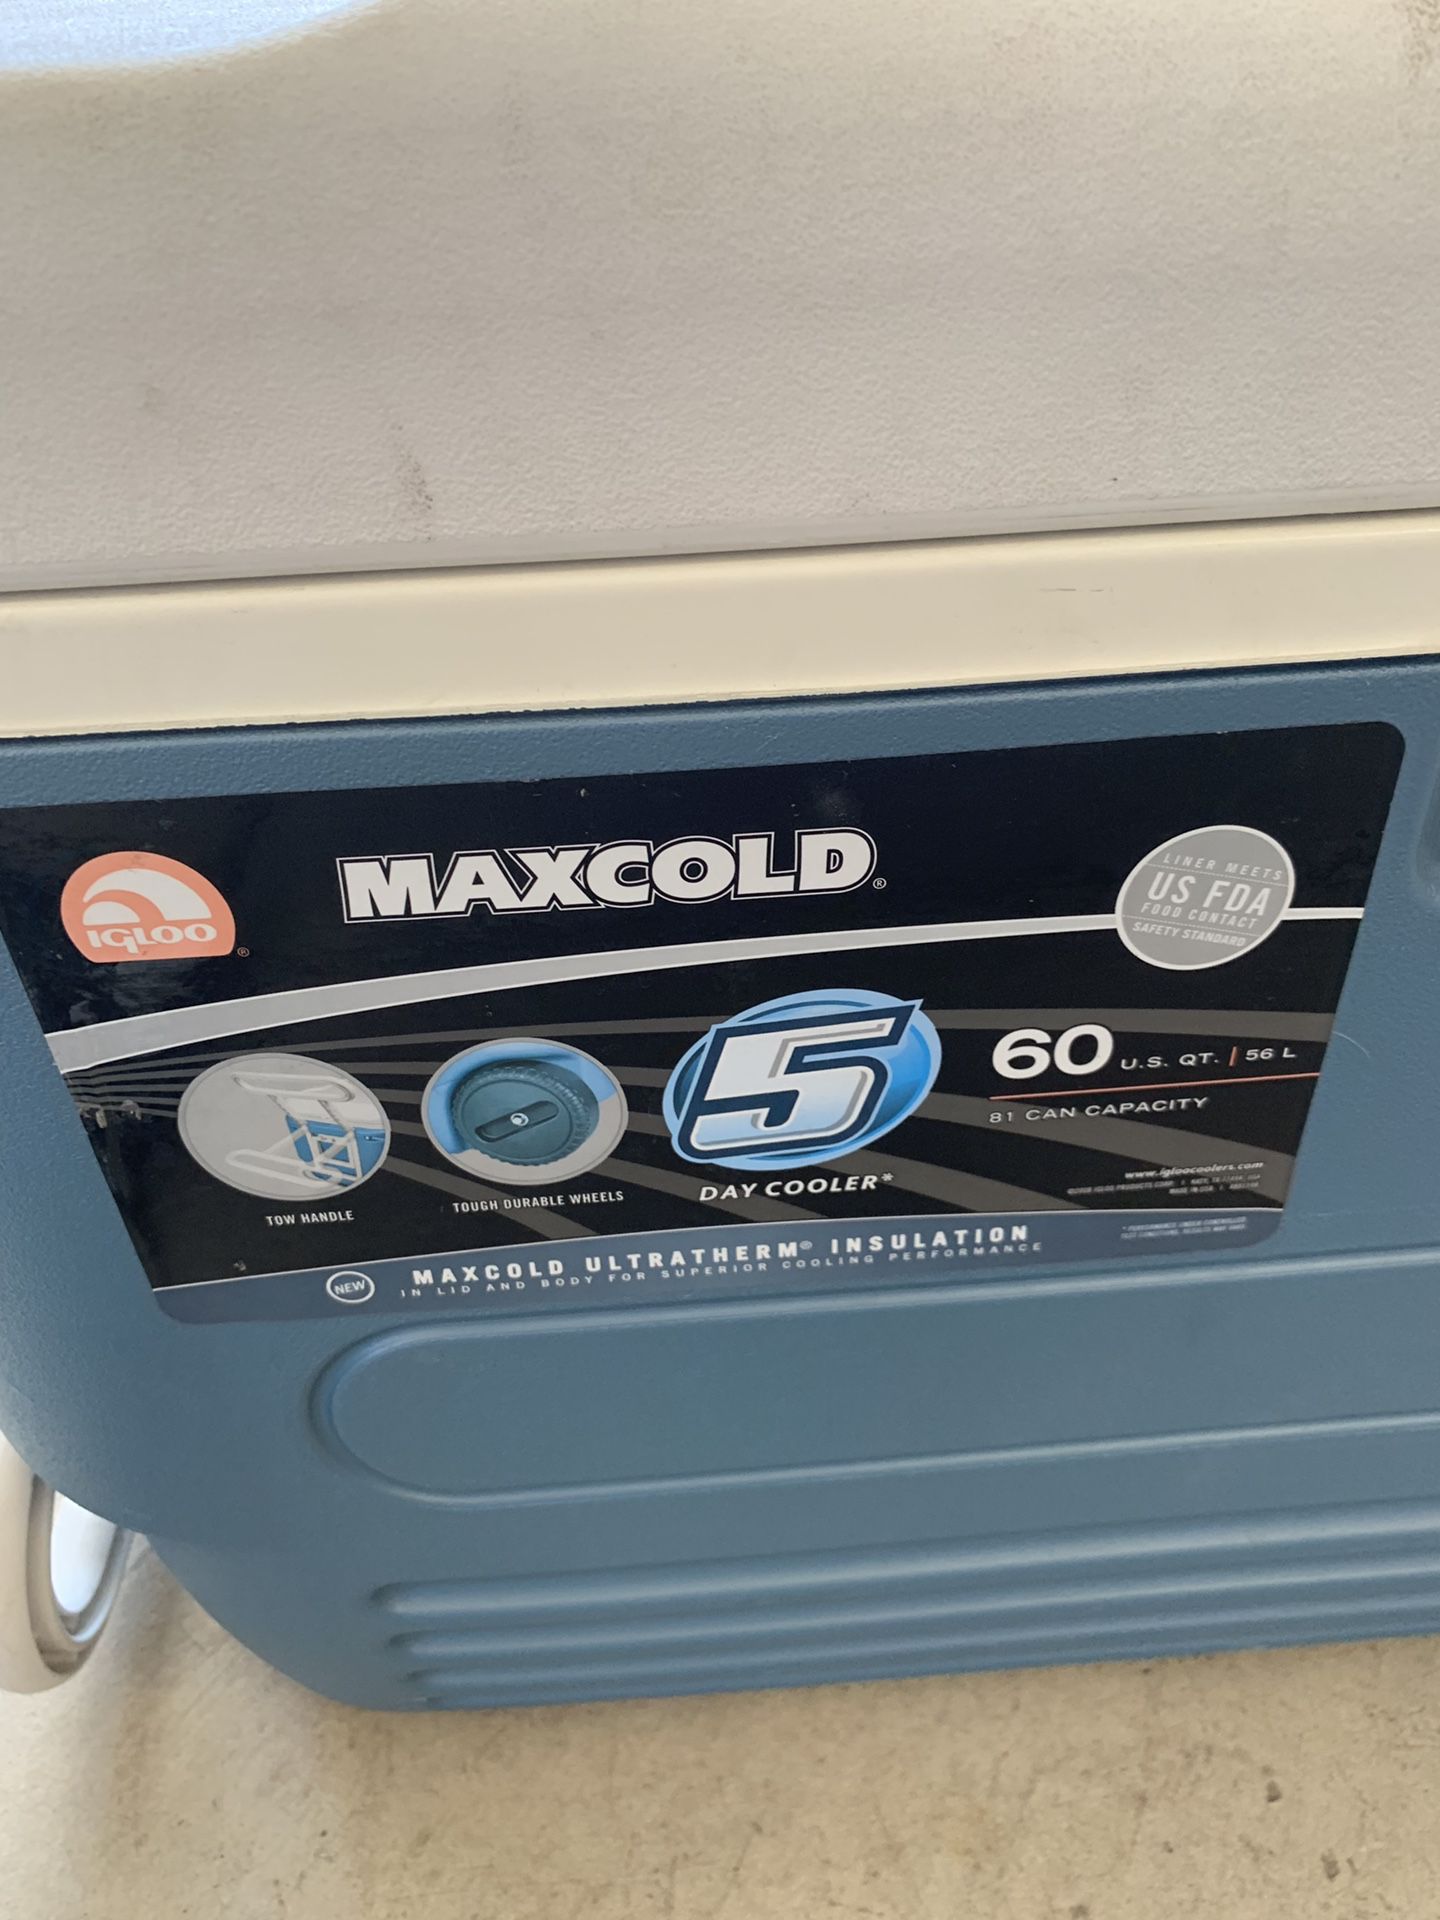 Maxcold cooler 60ct